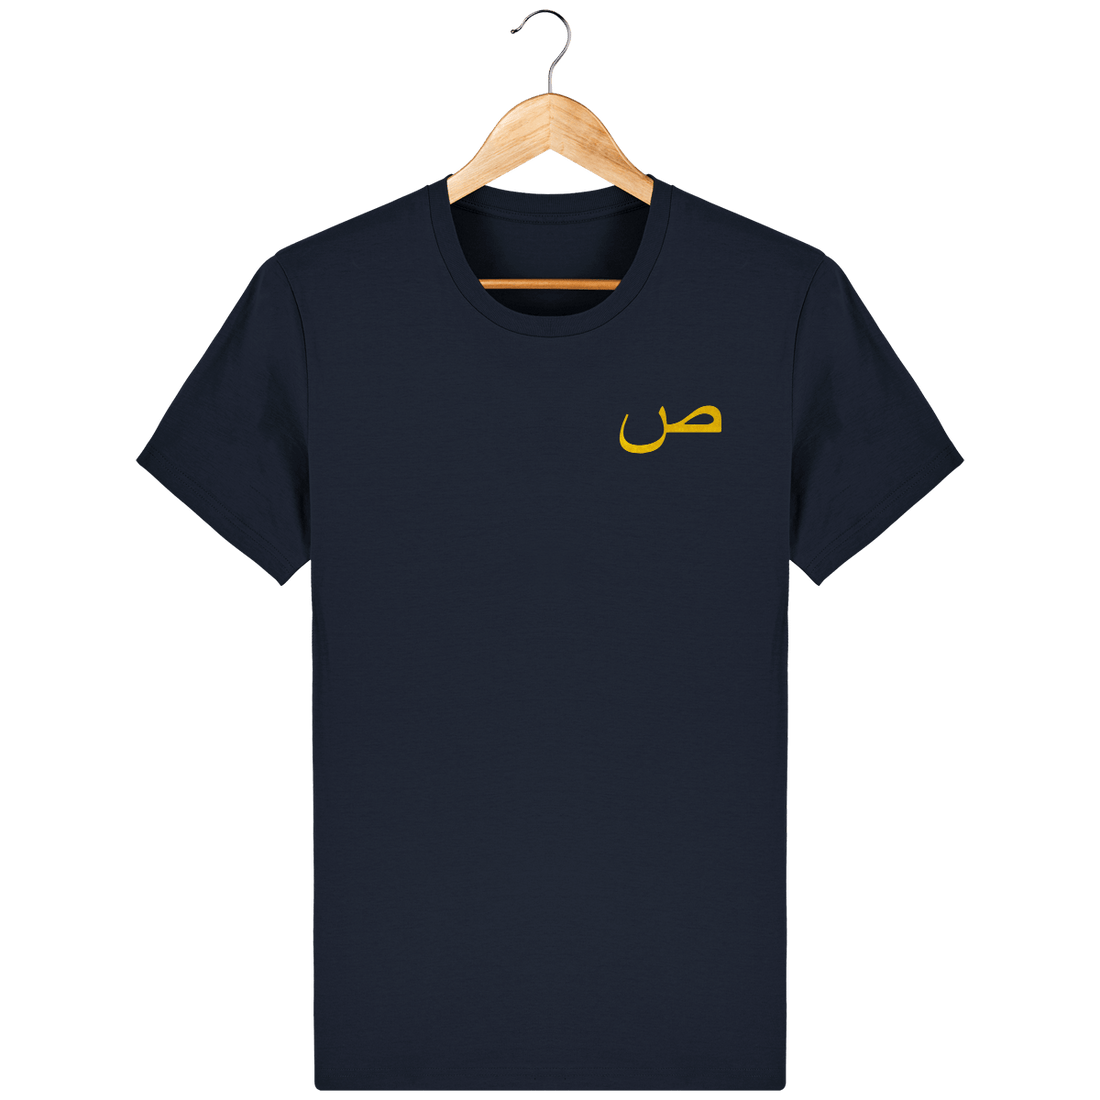 Unisexe>Tee-shirts - T-Shirt Homme <br> Lettre Arabe Saad